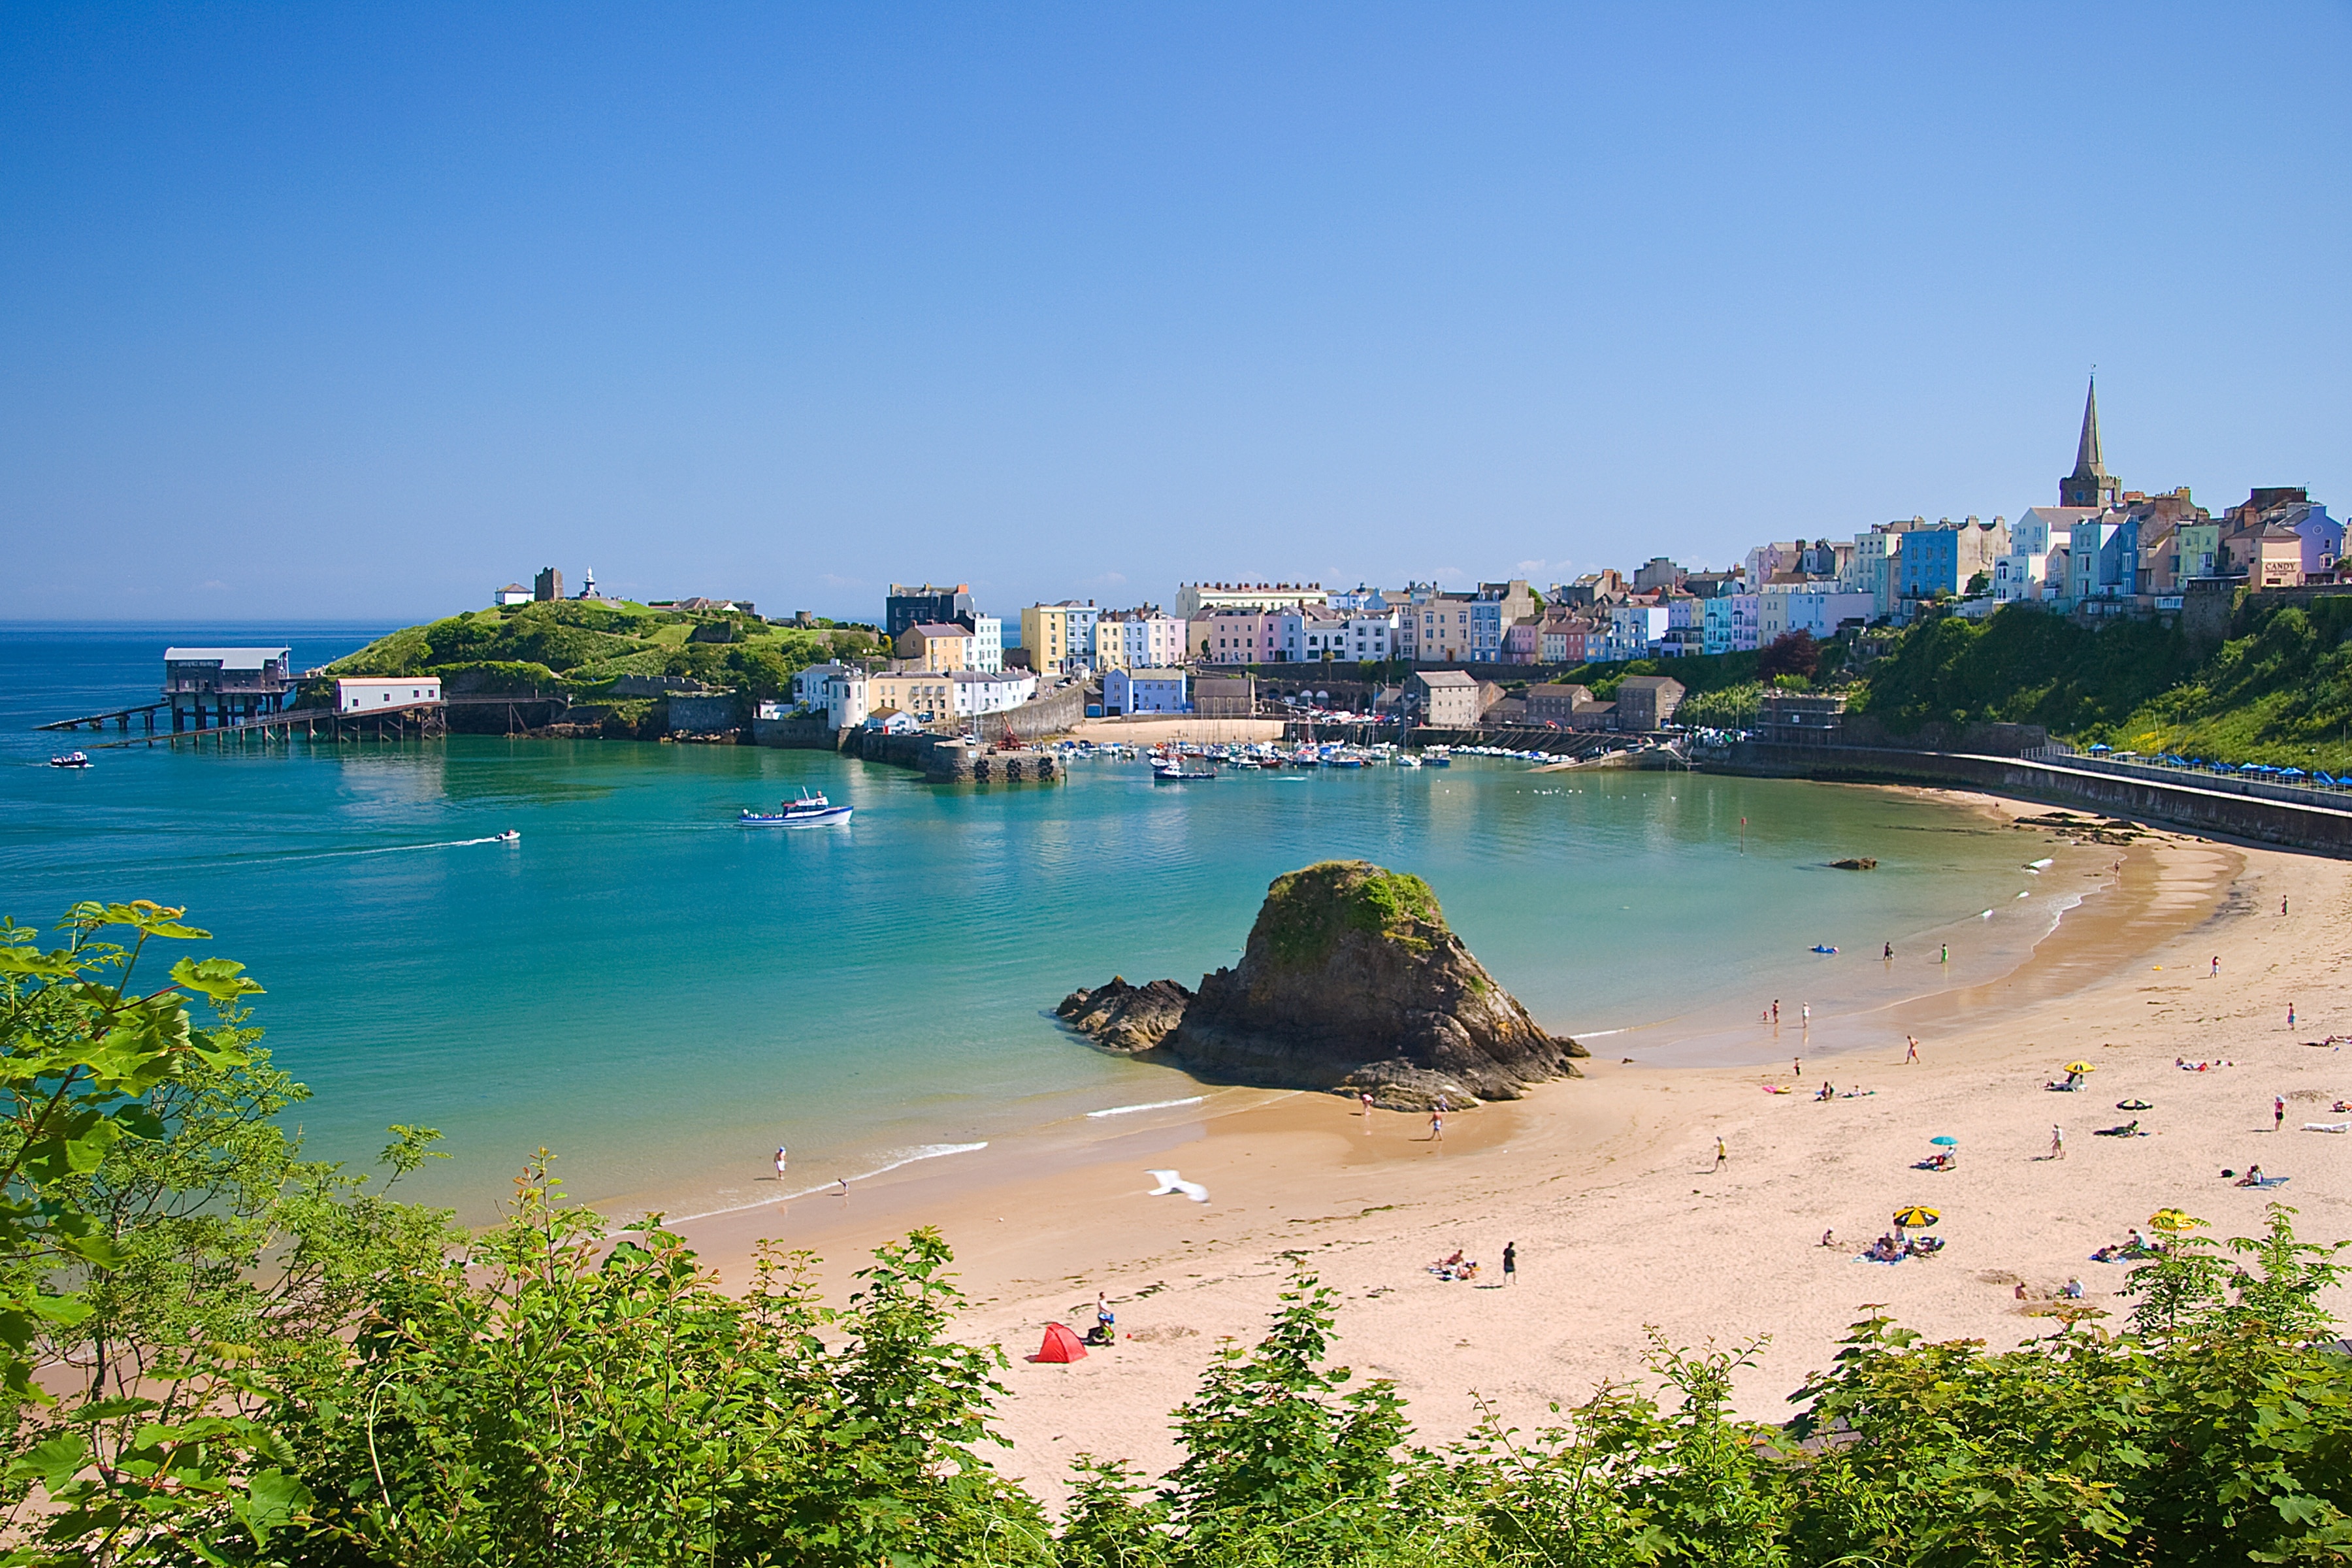 Visitors to Wales are often staggered by quite how picturesque it can be here and nowhere more so than at Tenby, probably the most iconic seaside town in the country. Tenby Beach is the generic name given to not one but four of its beaches, all of which offer sheltered, deep blue water and outstanding views.